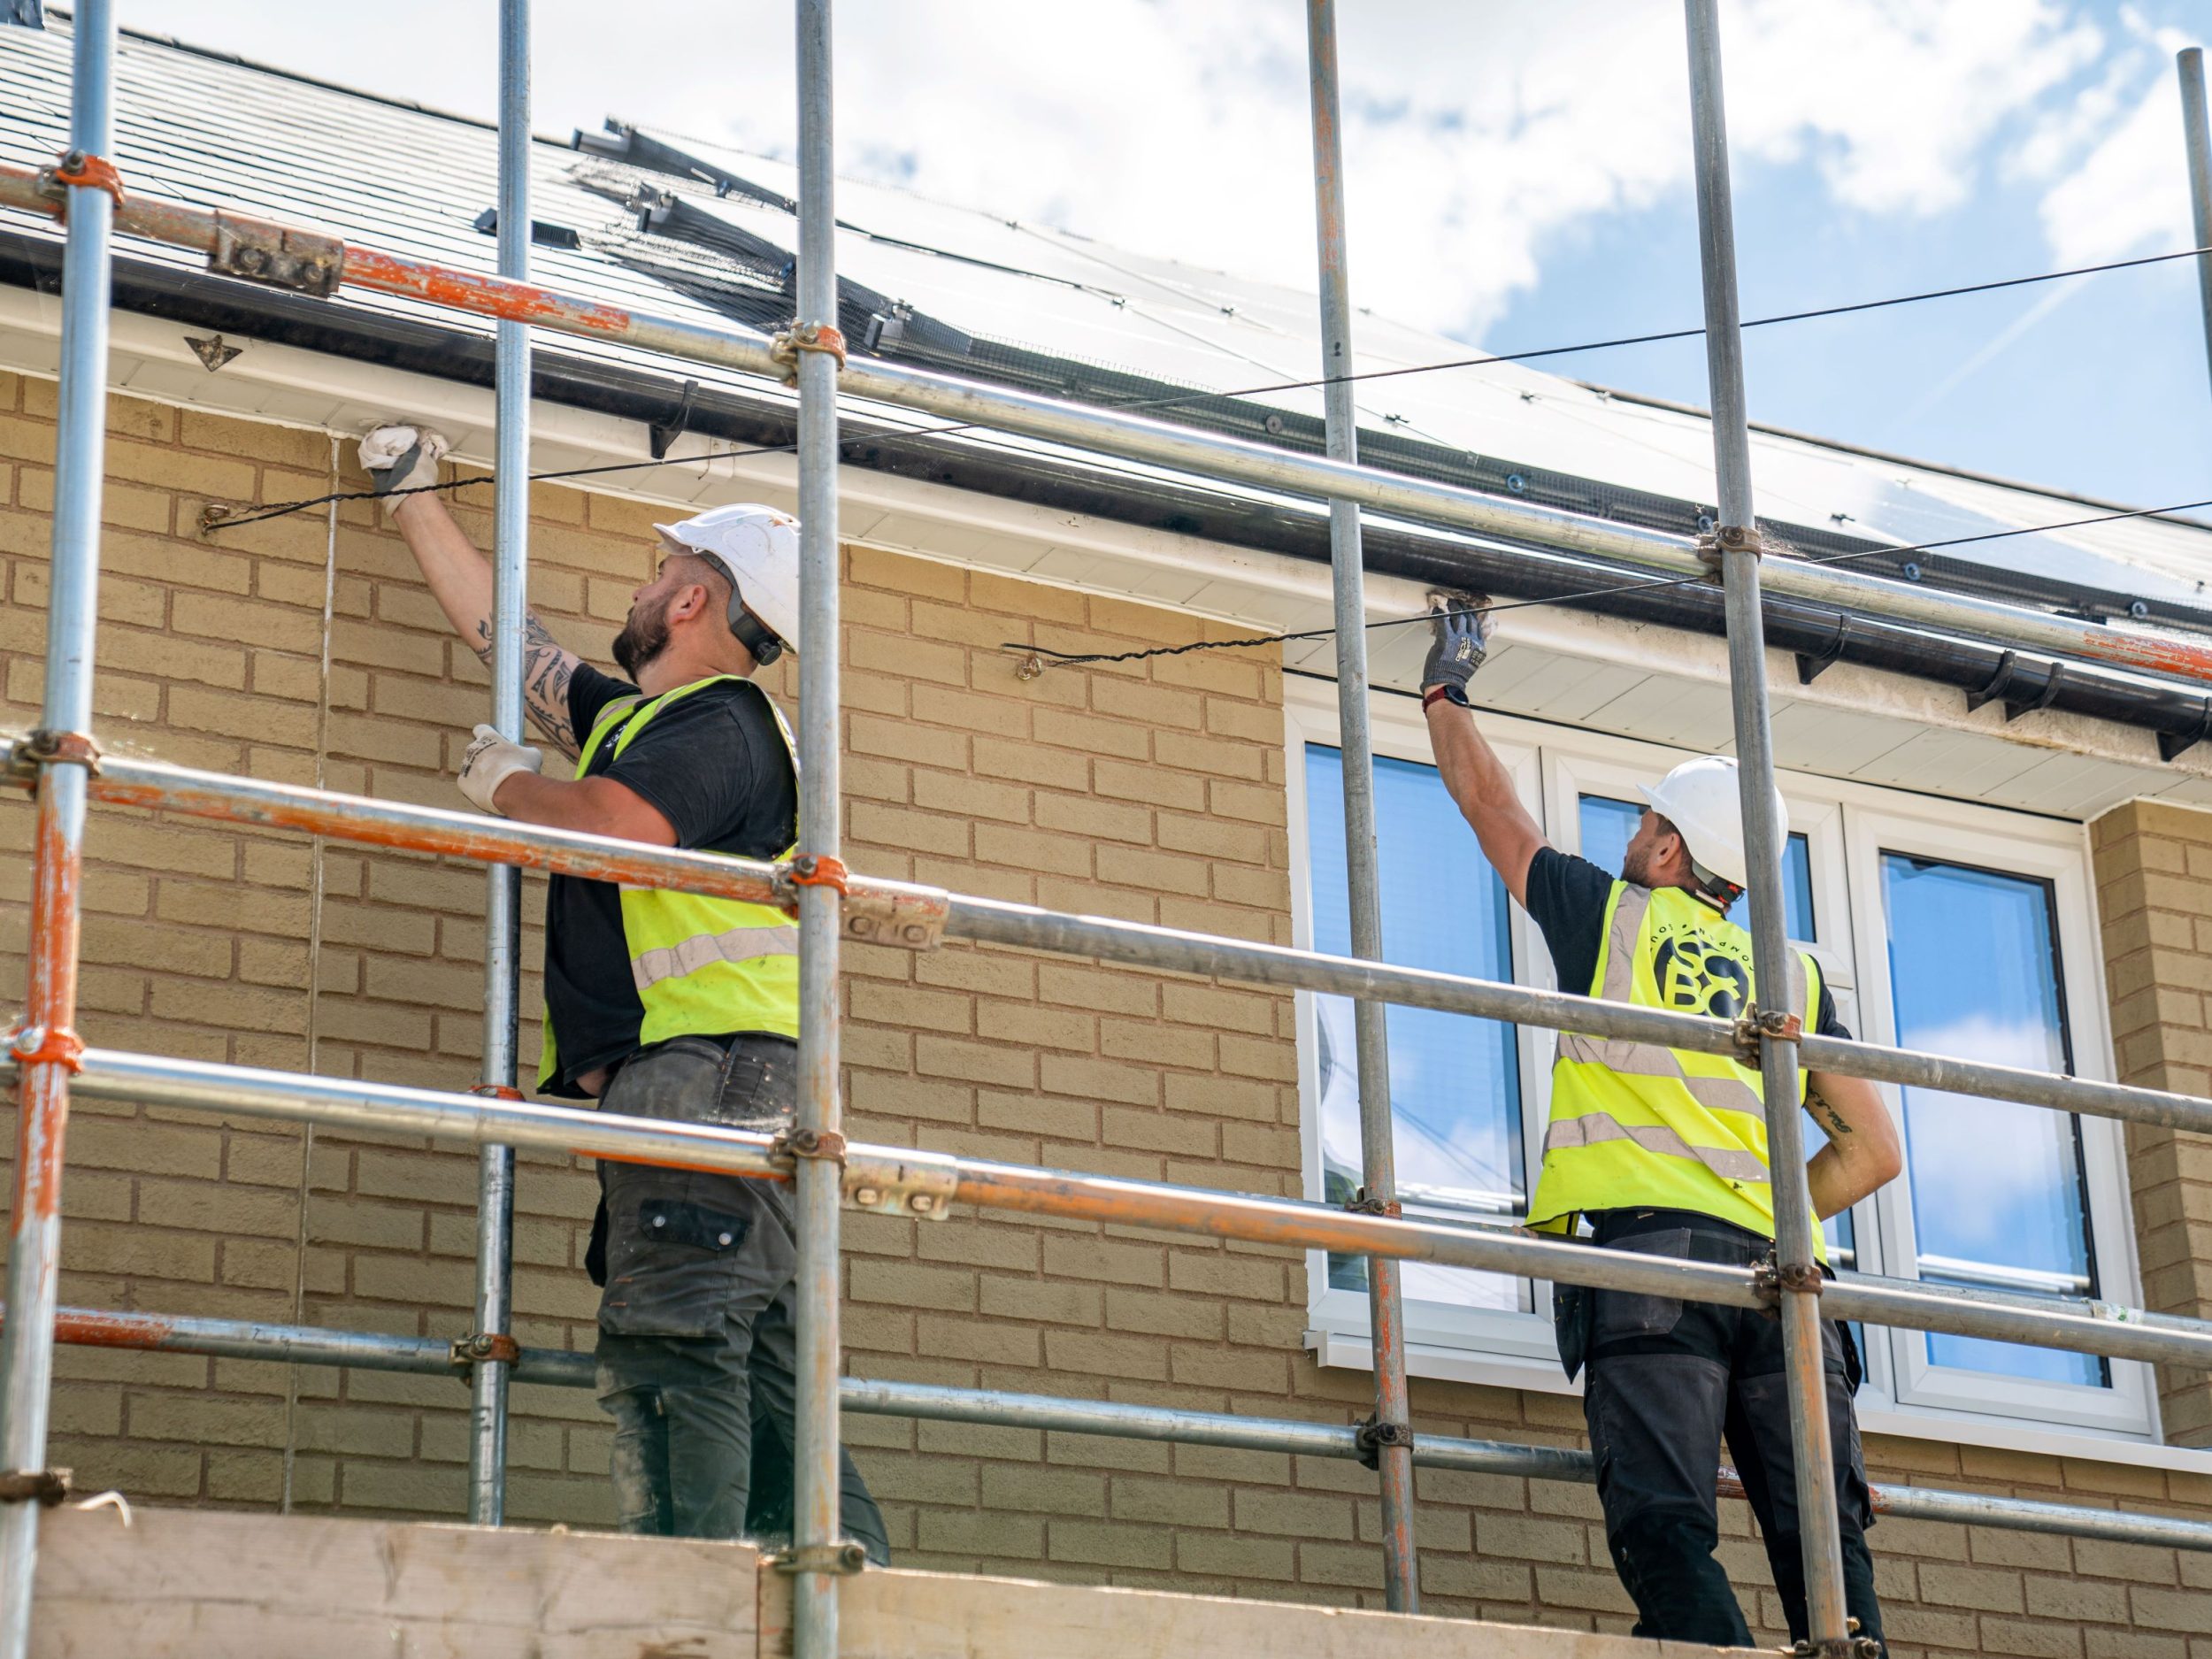 SHDF success relies on practical retrofit skills gap being addressed, says expert